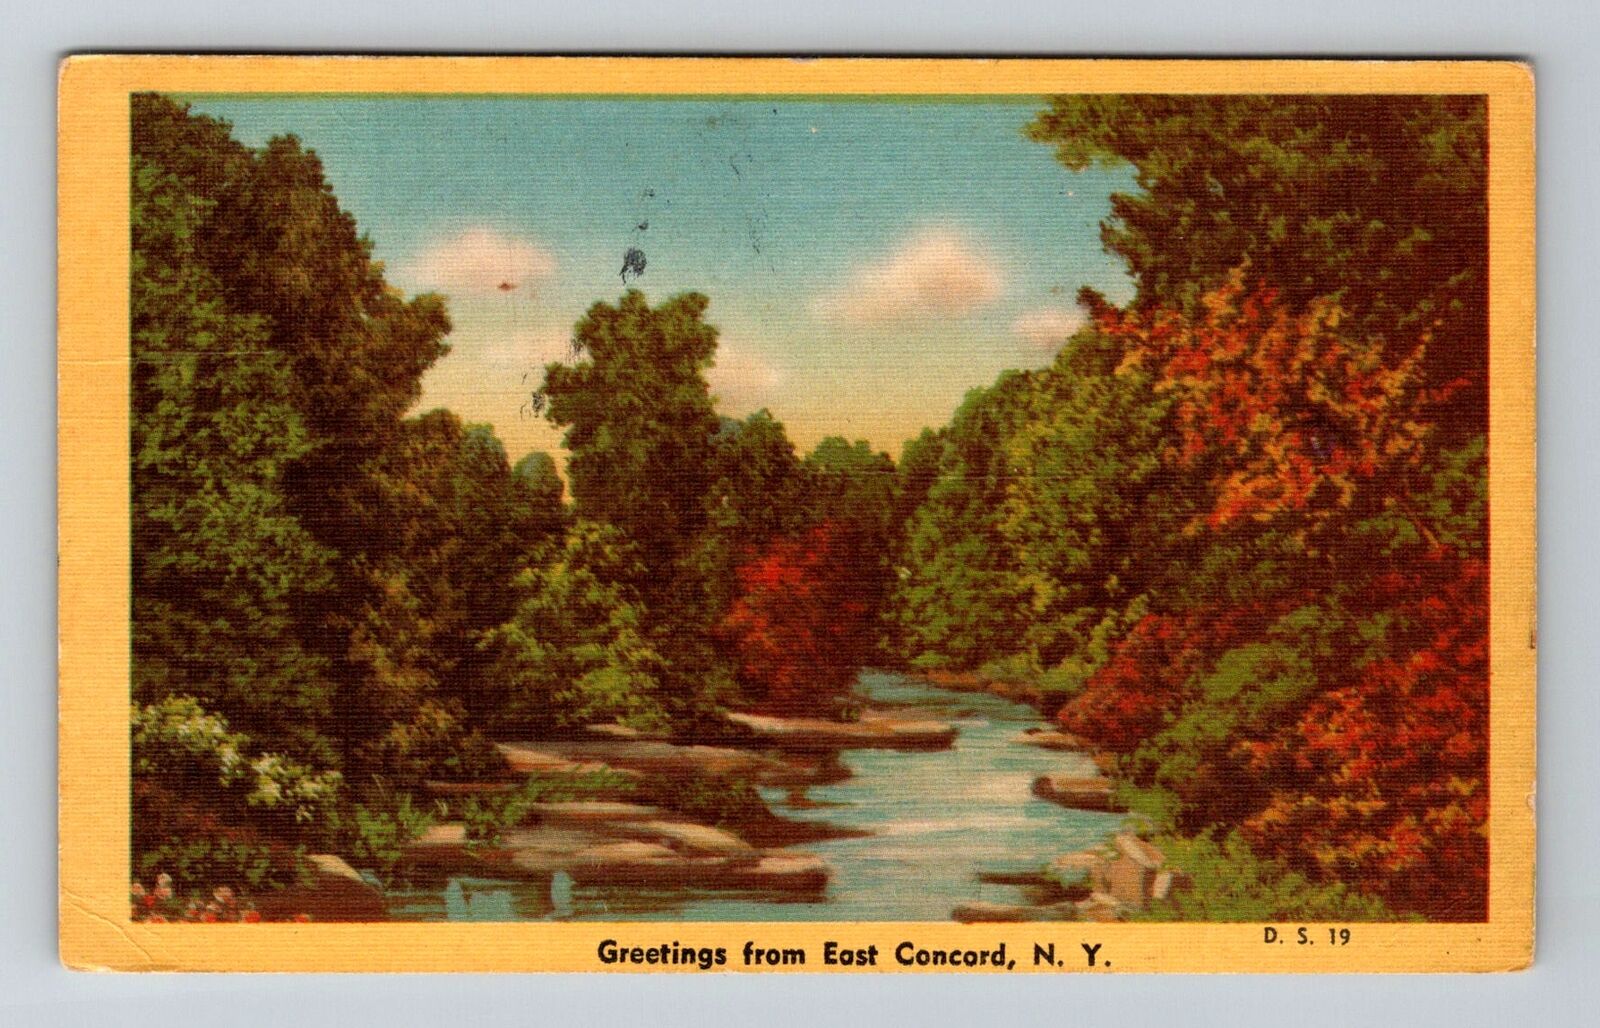 East Concord NY-New York, General Greetings, River, c1947 Vintage Postcard